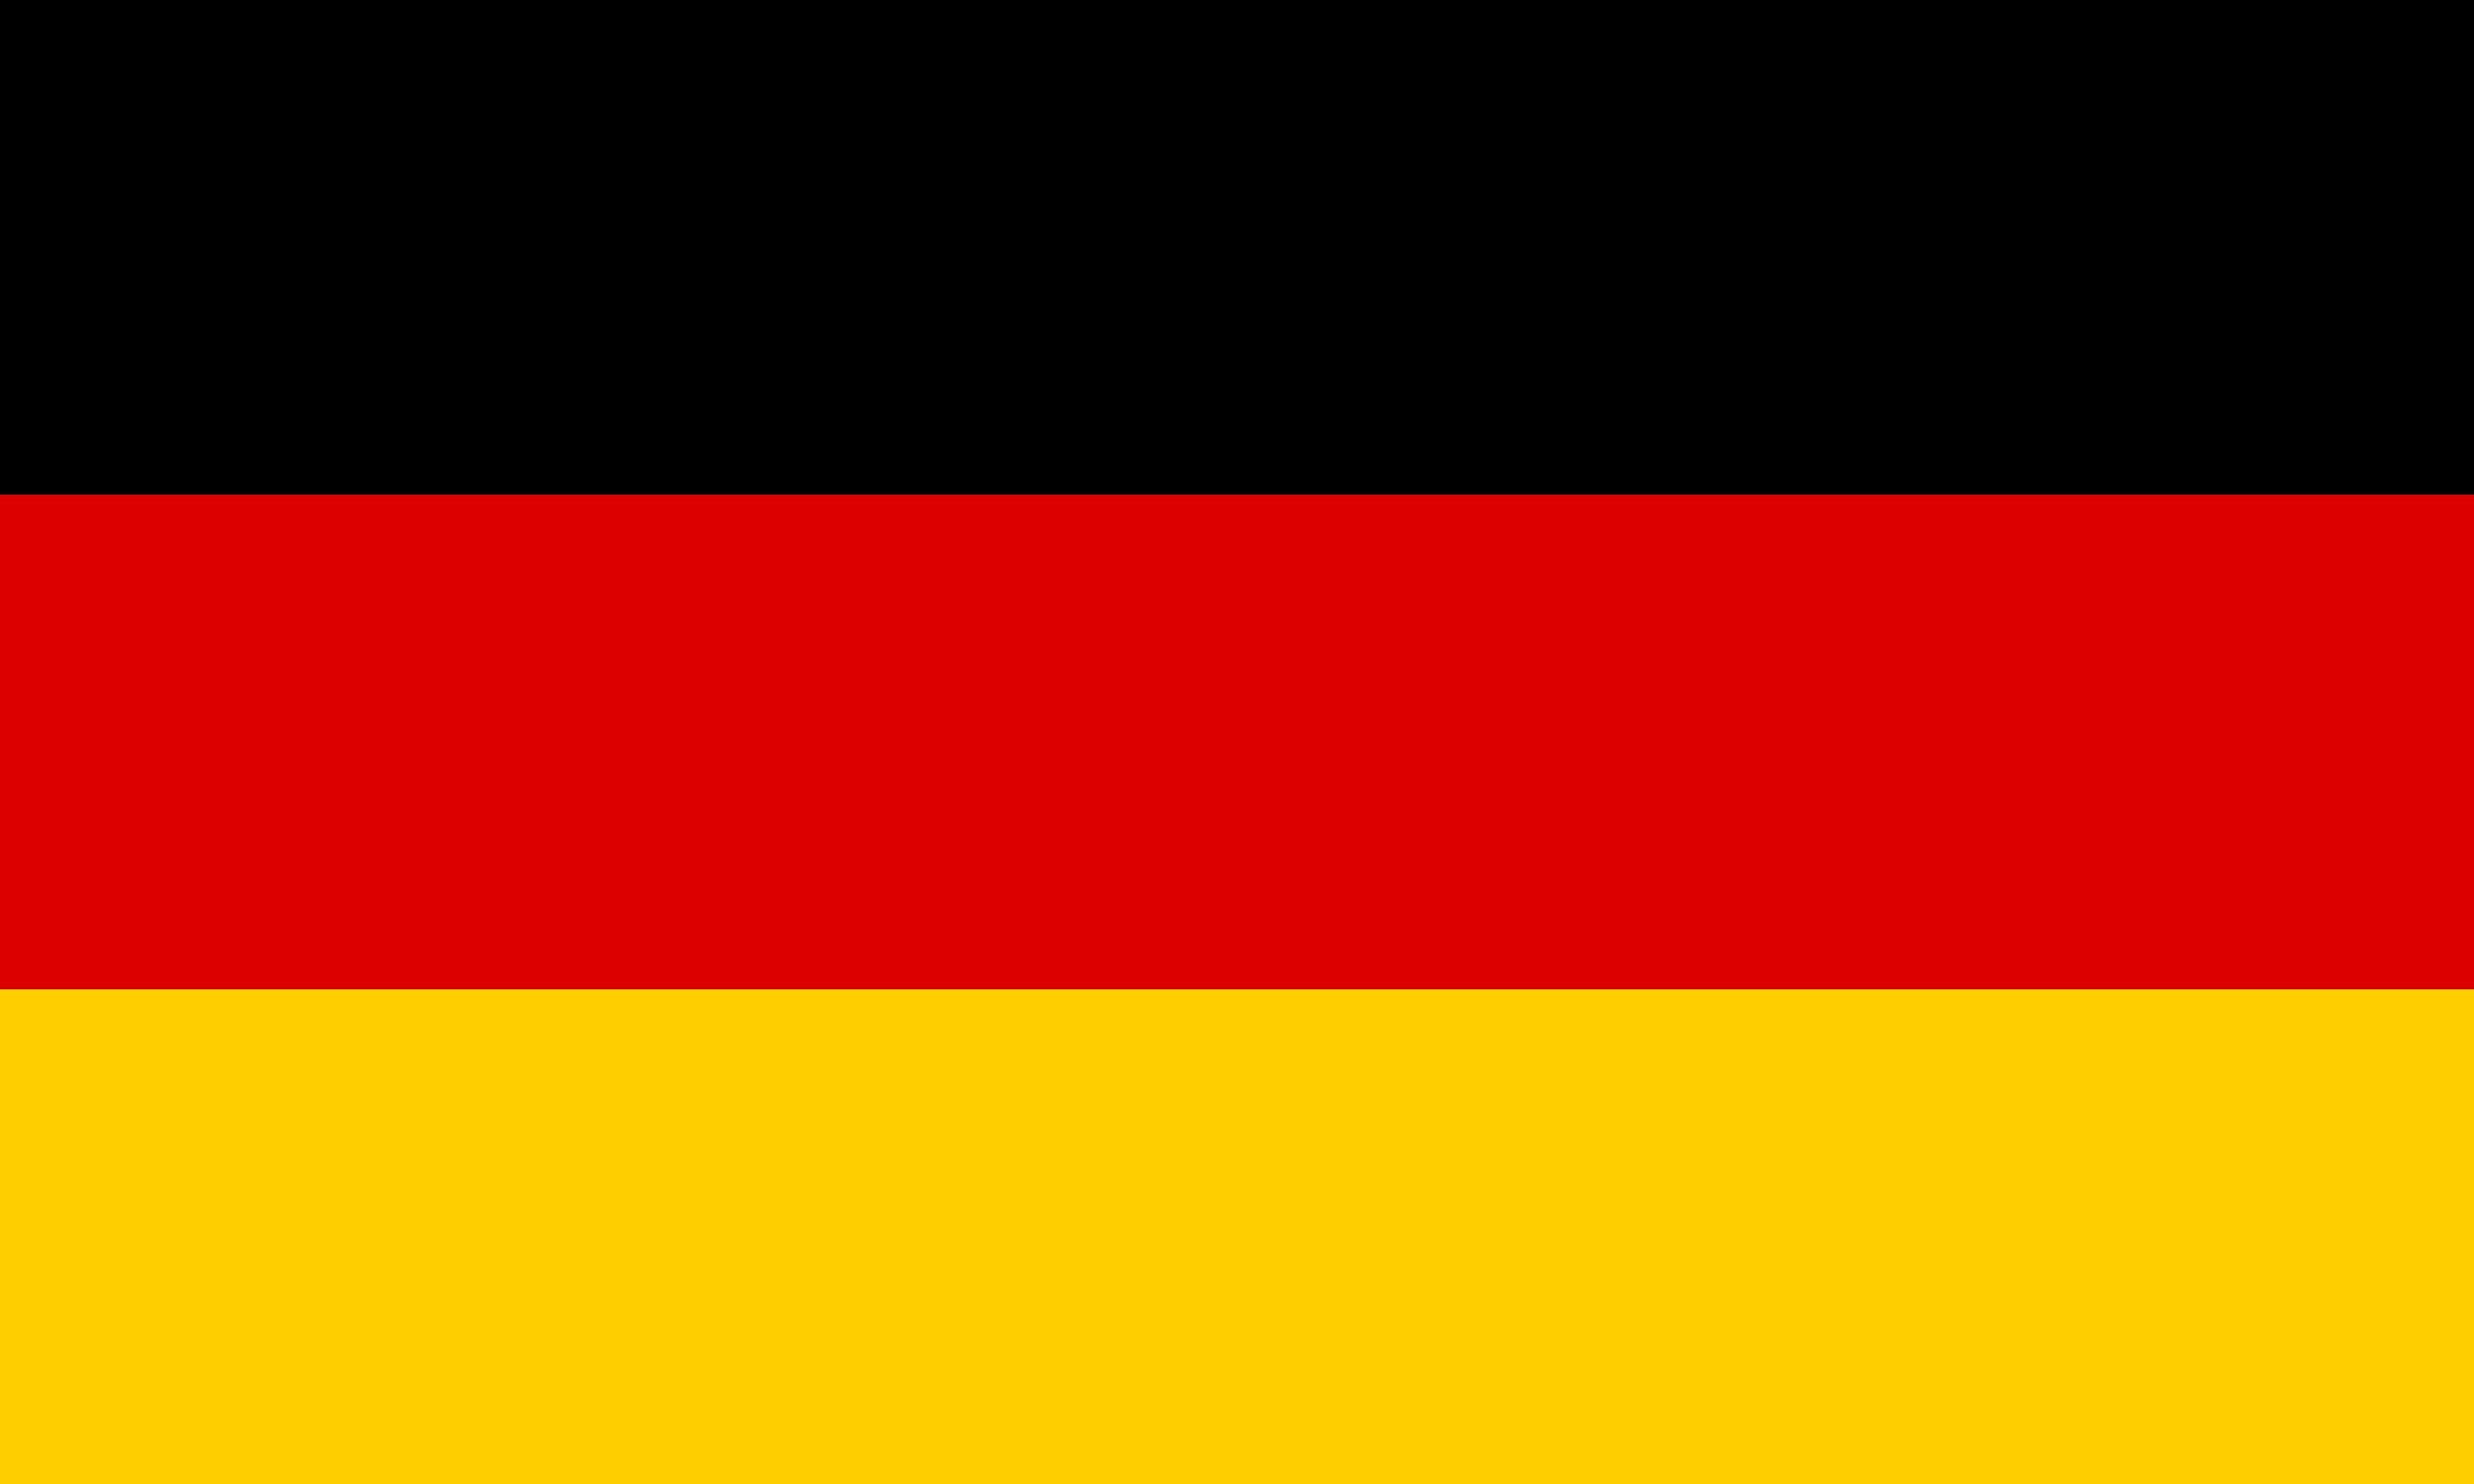 the image shows the german flag